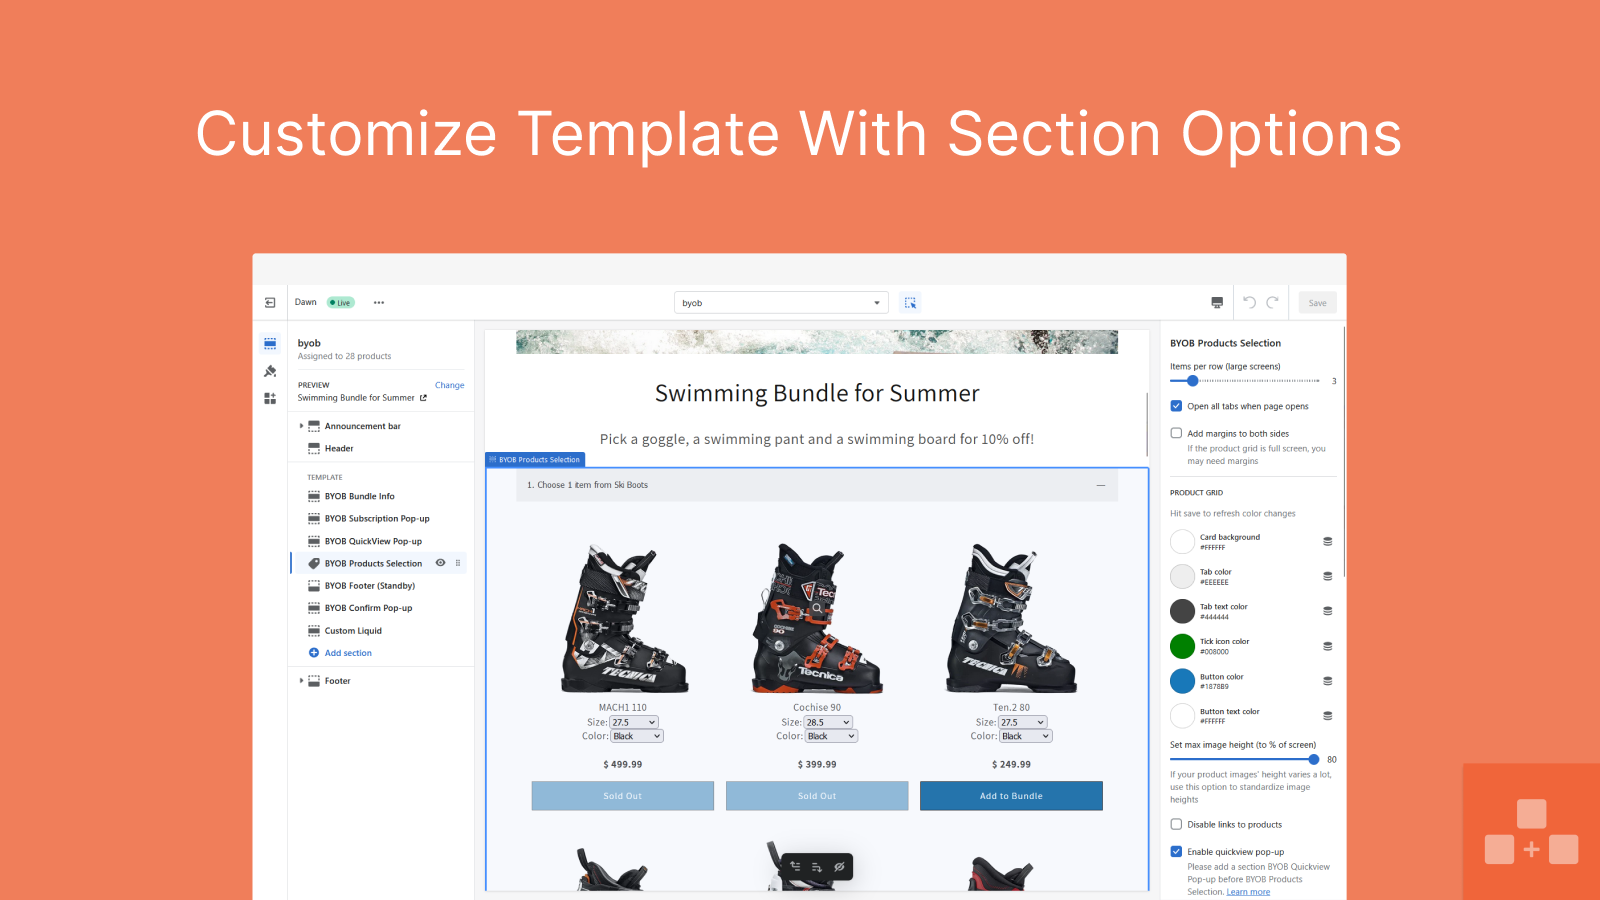 Customize Template Design with Plenty of Section Options